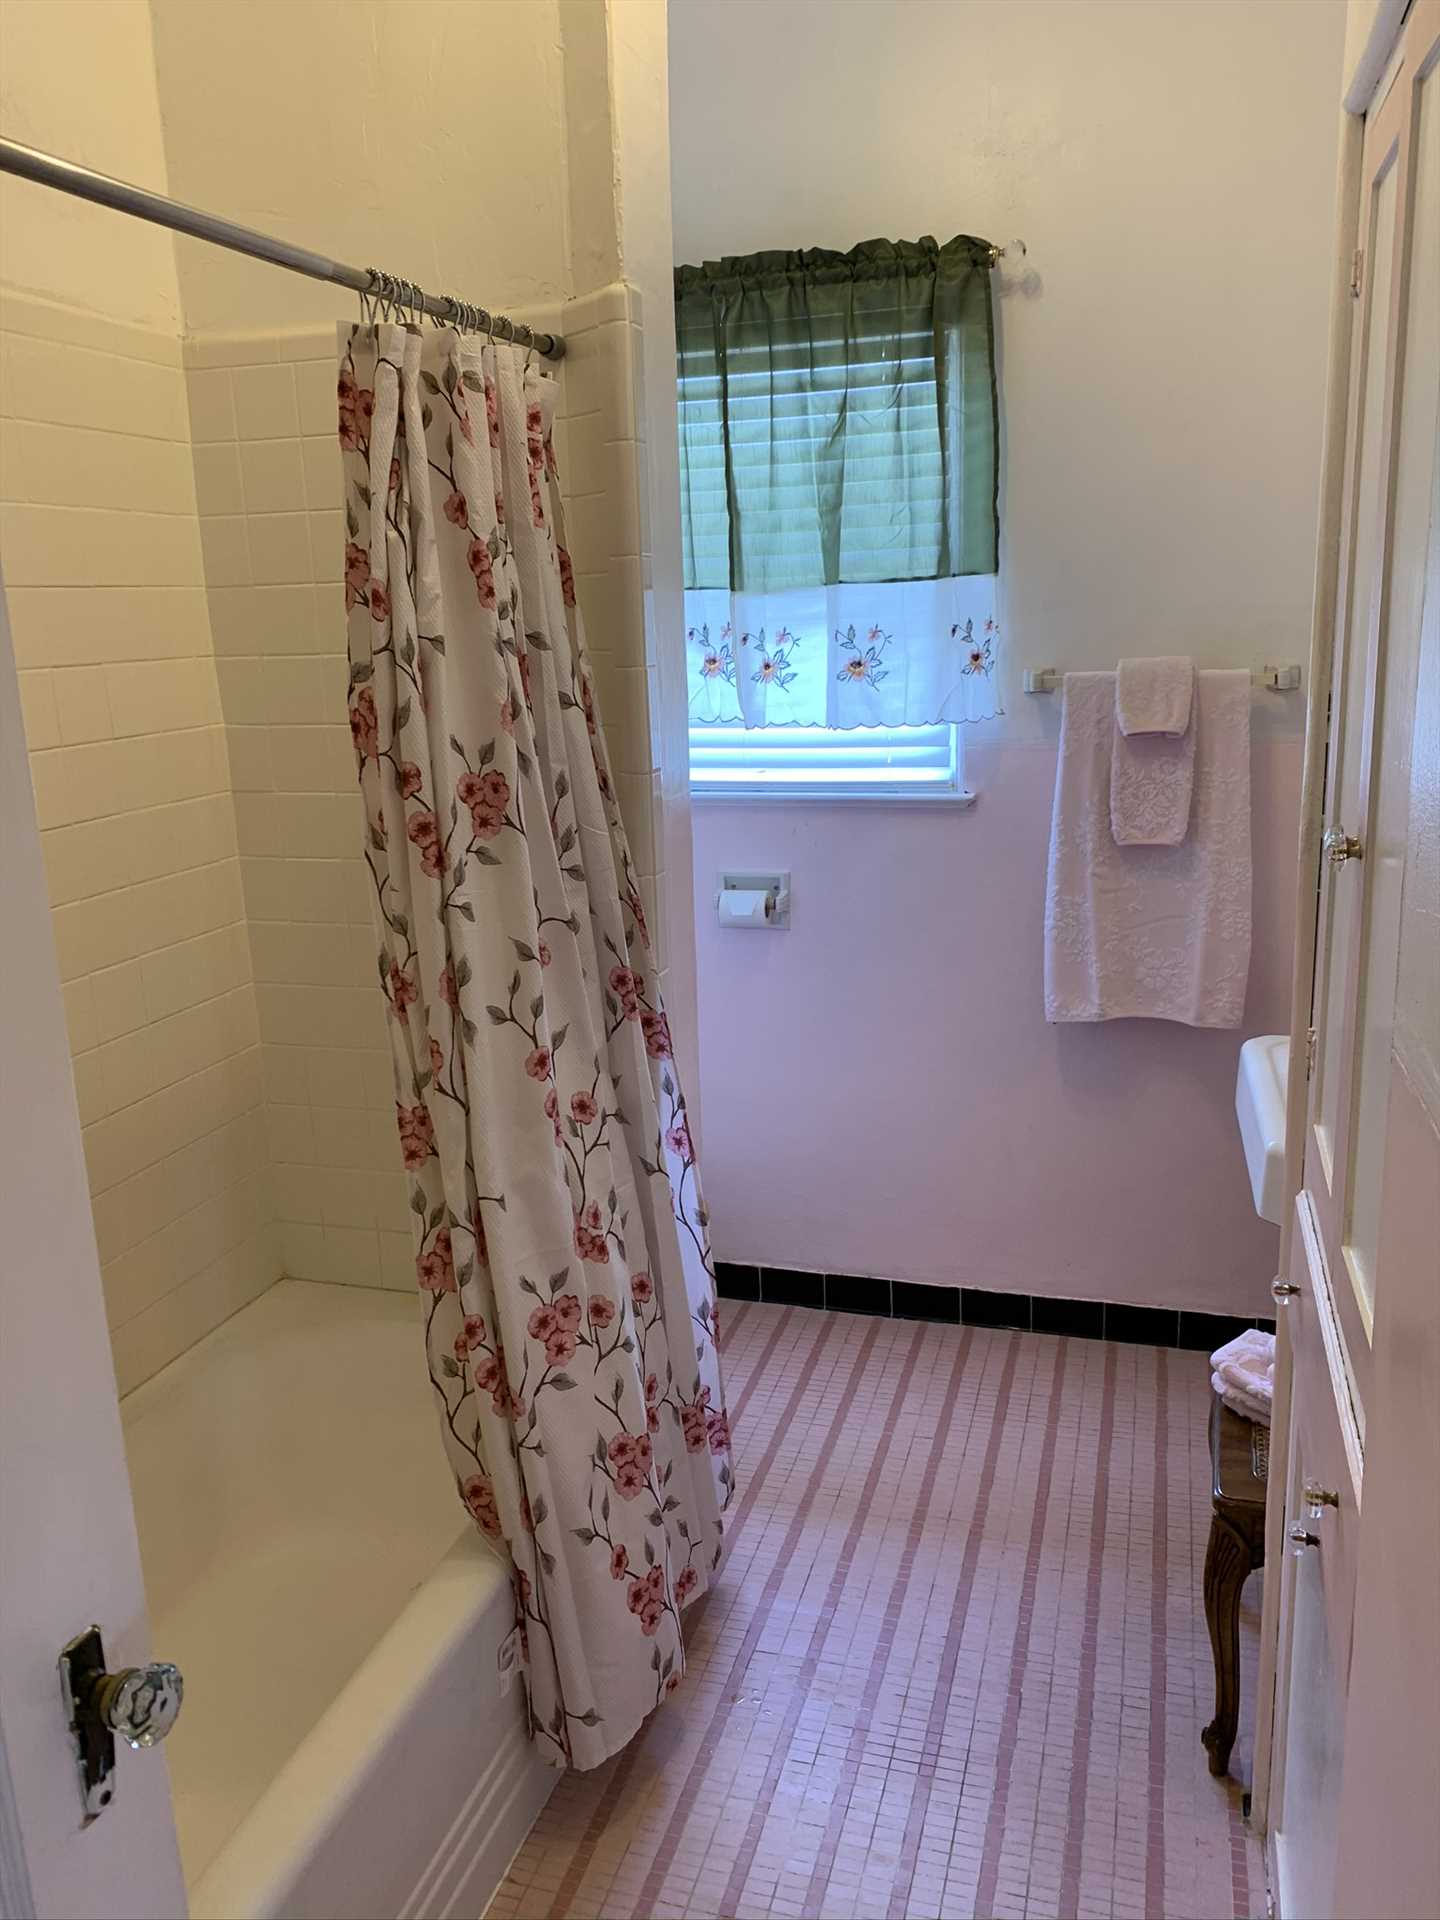                                                 A convenient shower and tub combo can be found in the third upstairs bathroom. As you can see, there's tons of cleanup space for everyone!